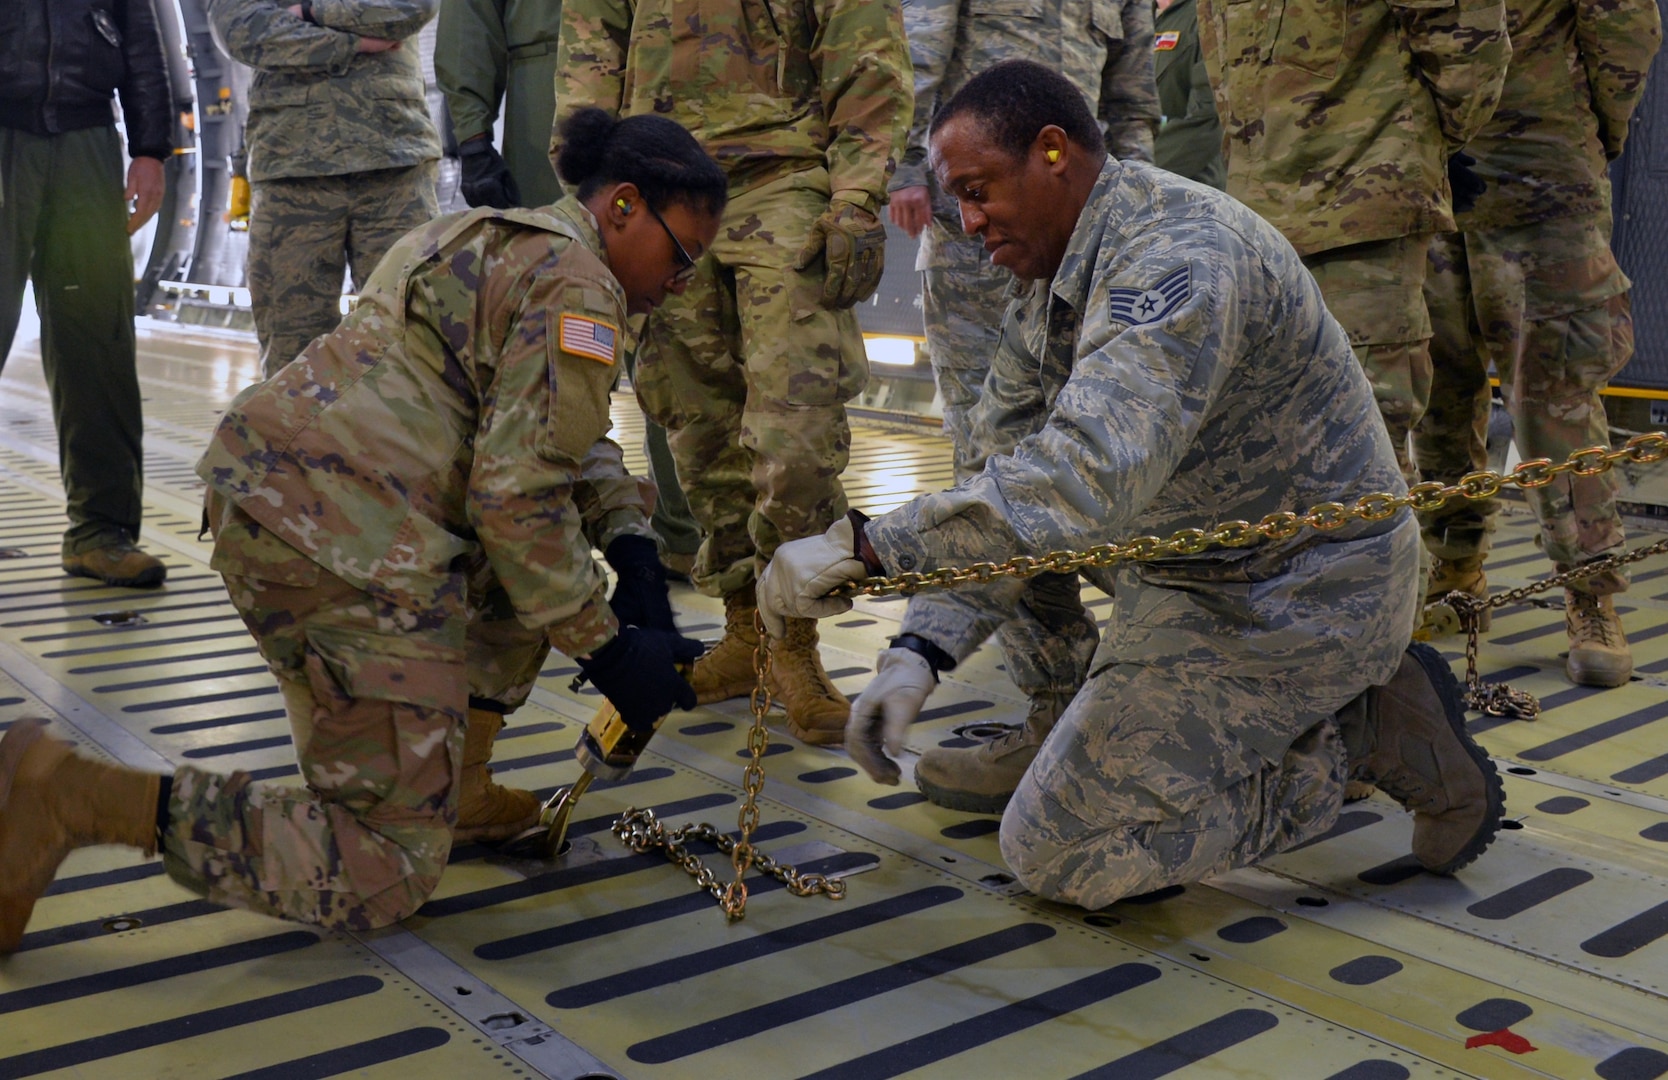 Air Force Staff Sgt. Wayne Burke (right), 26th Aerial Port Squadron air transportation specialist, instructs Army Private 1st Class Shakirra Hoyte (left), 13th Expeditionary Sustainment Command, on how to secure a vehicle for air transportation in a C-5M Super Galaxy aircraft March 2, 2019, at Joint Base San Antonio-Lackland, Texas.